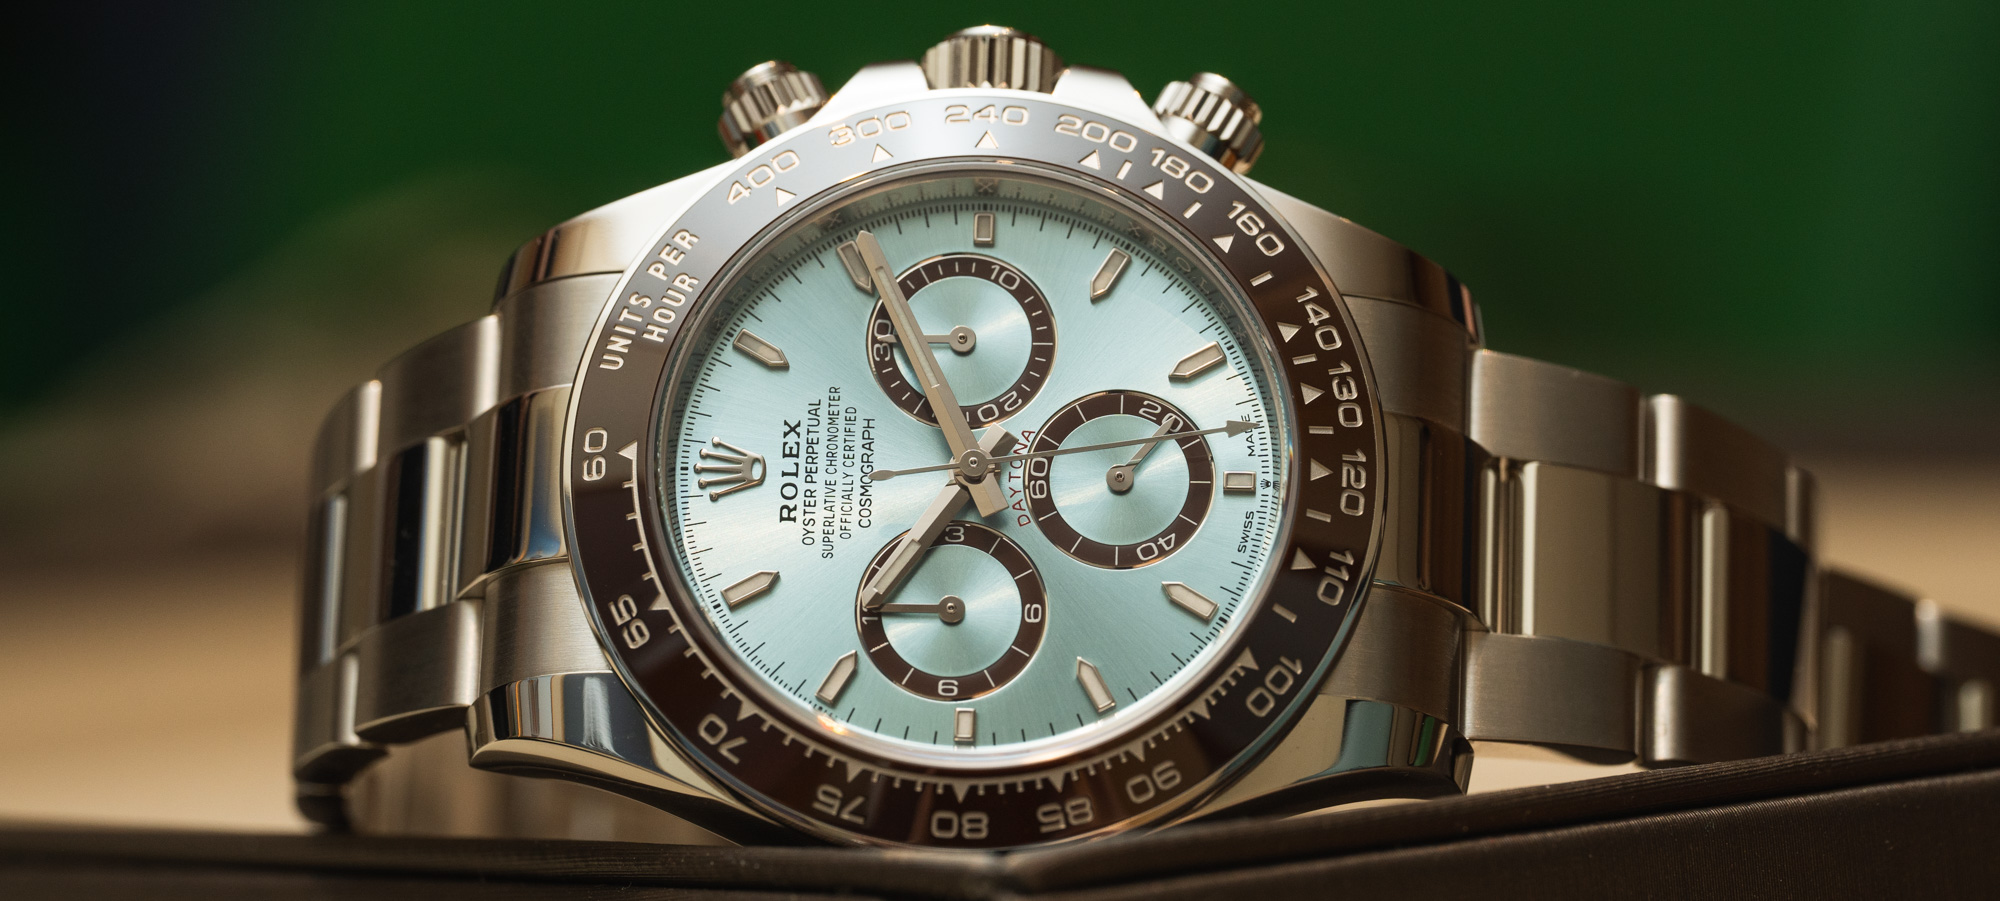 Hands-On: The Rolex Cosmograph Daytona Watches |